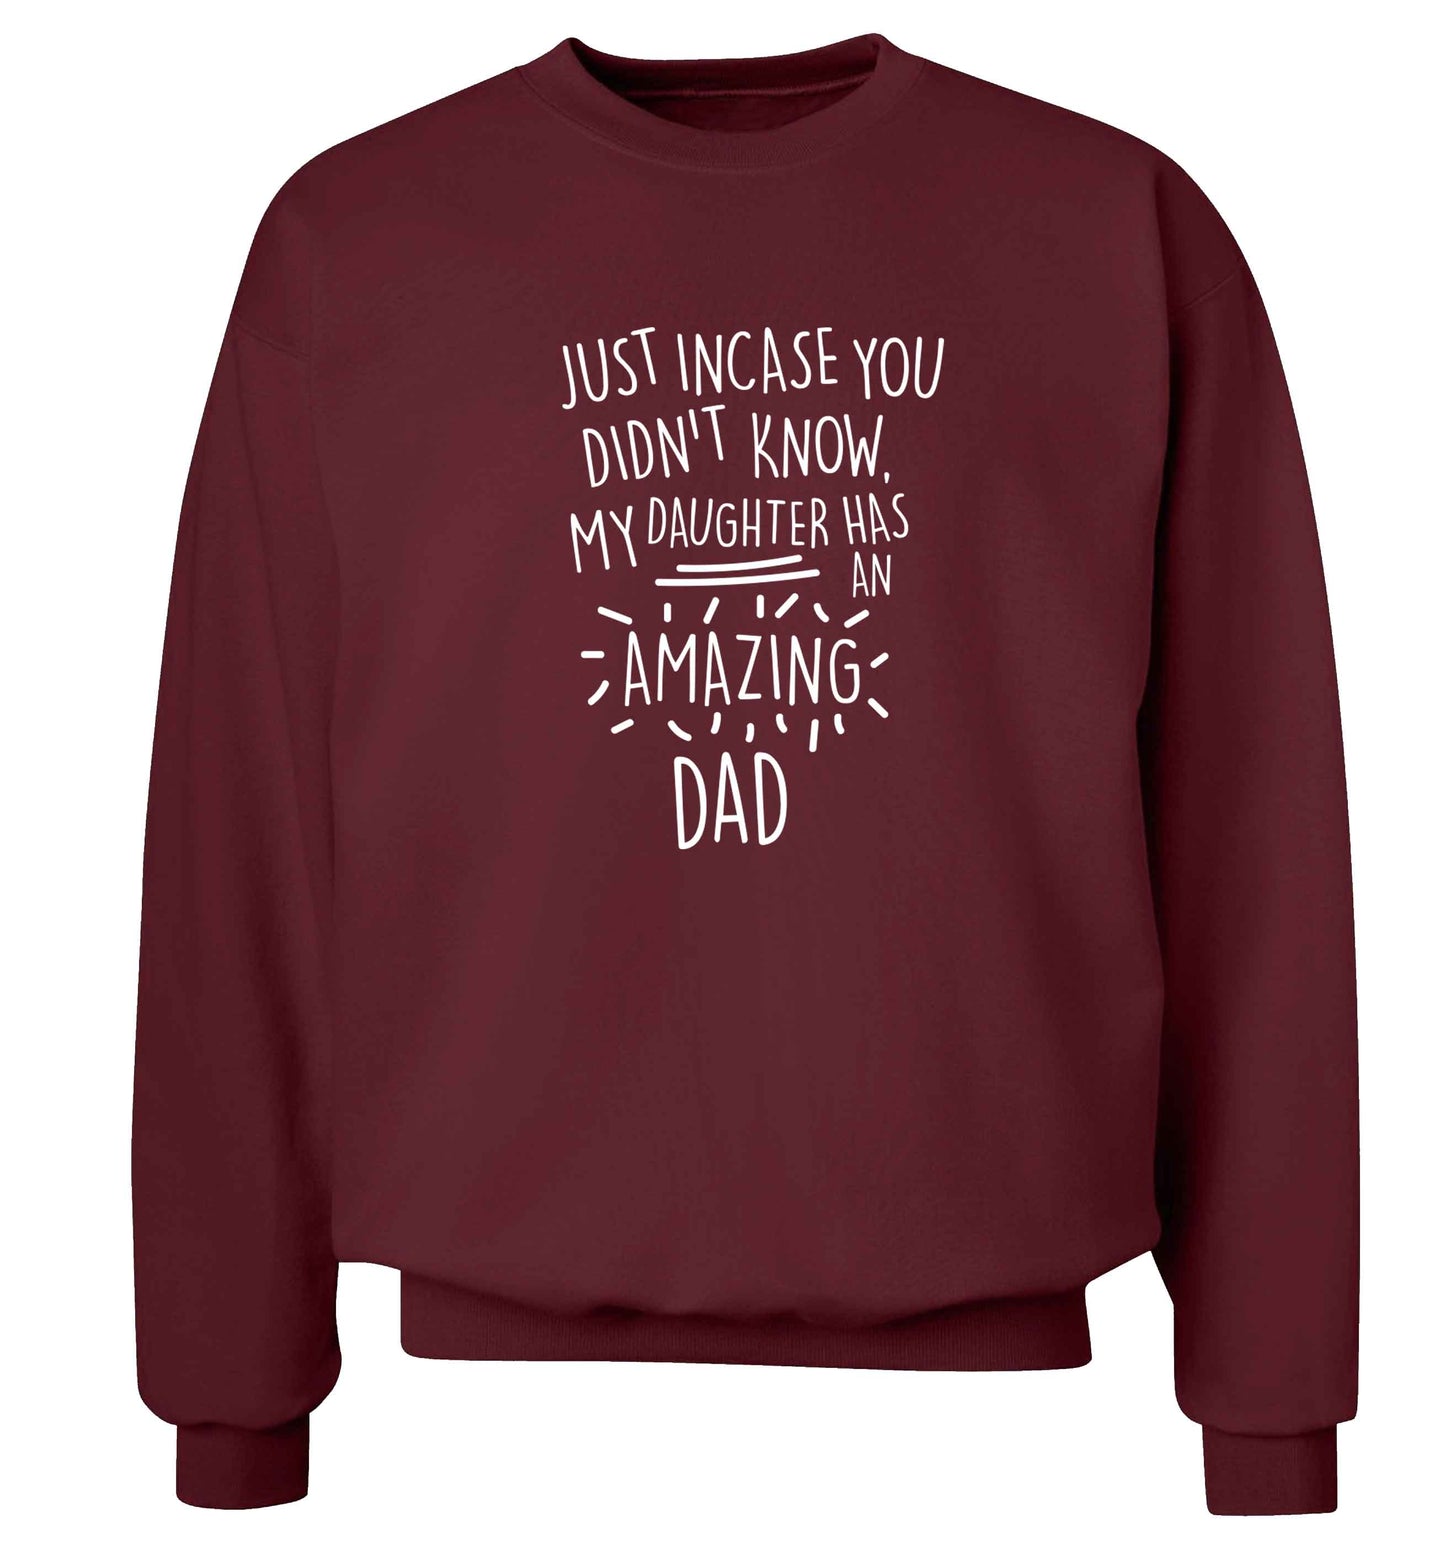 Just incase you didn't know my daughter has an amazing dad adult's unisex maroon sweater 2XL